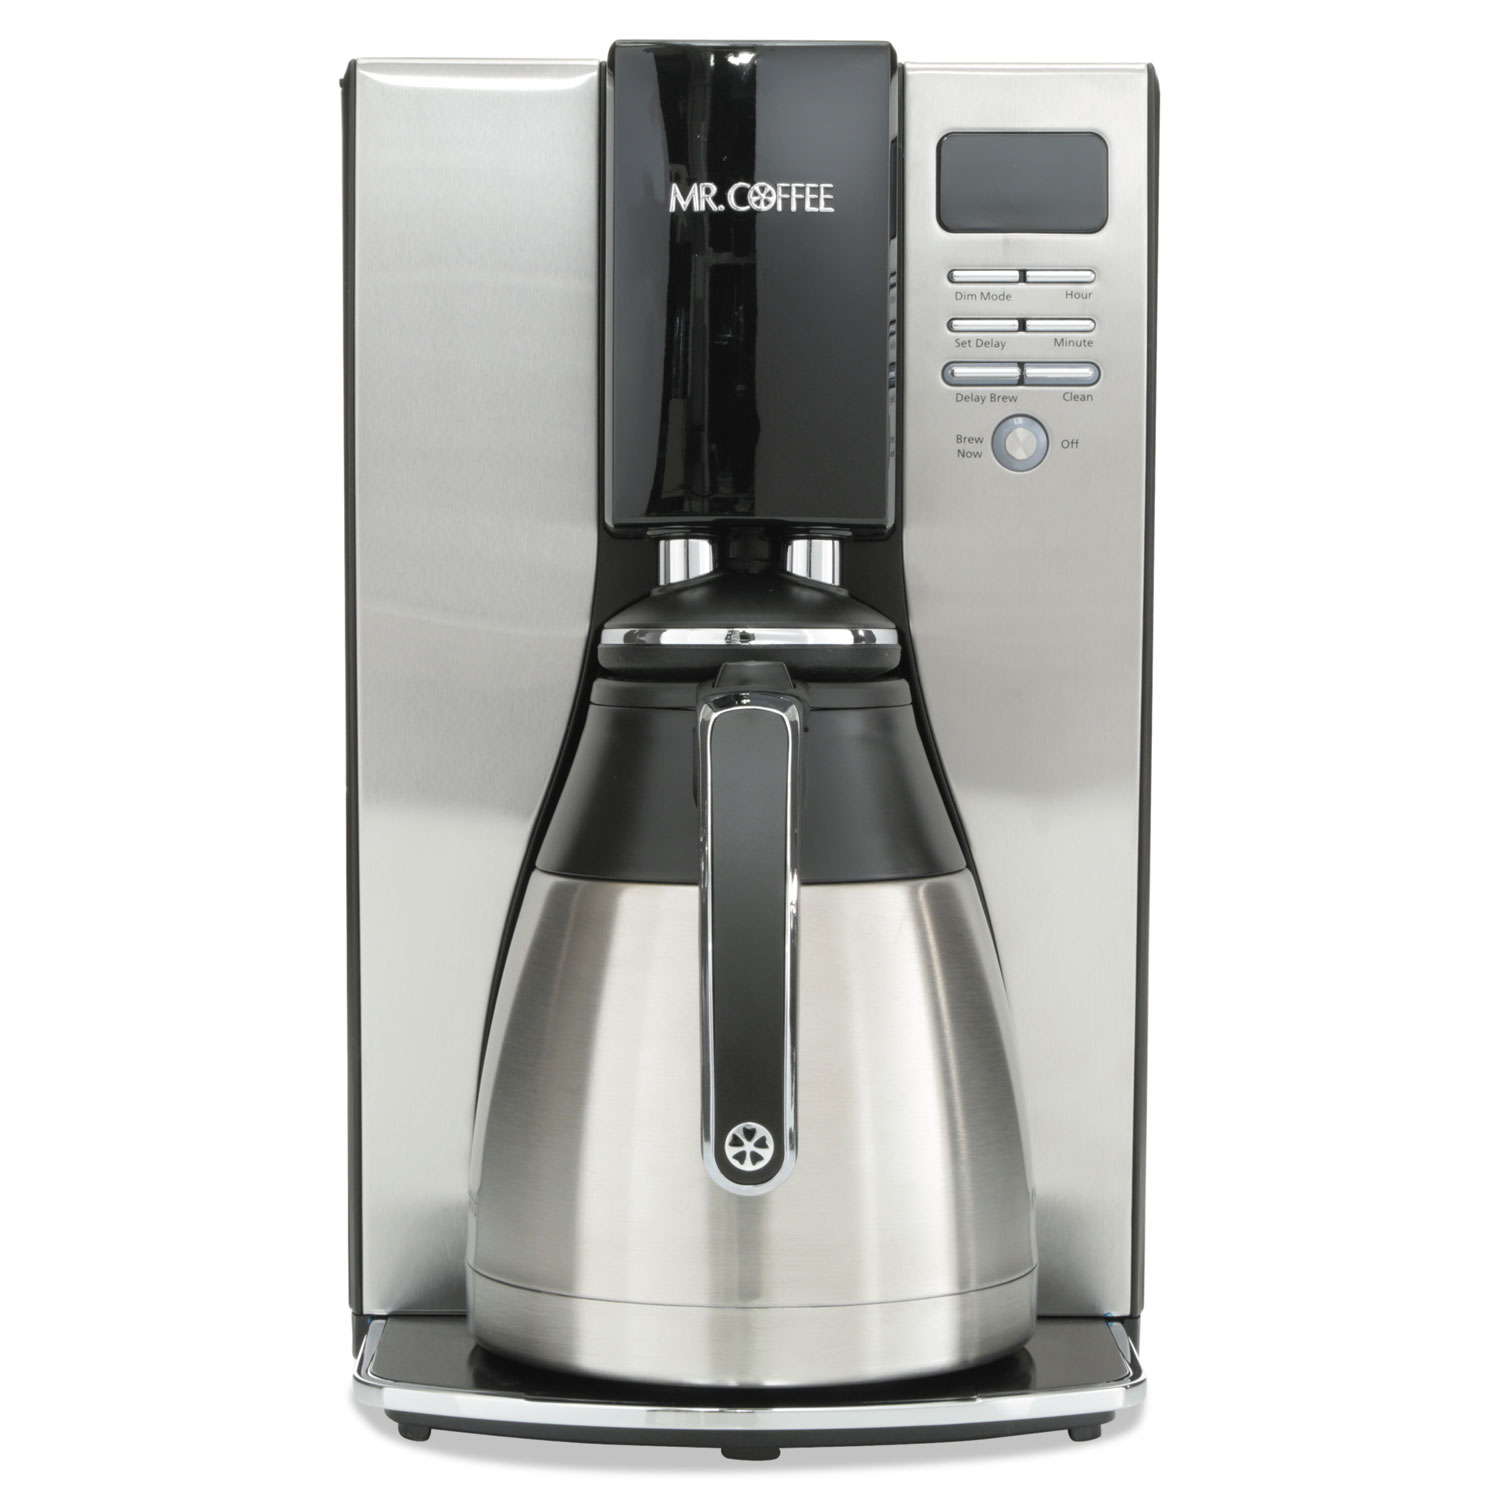 Mr. Coffee Stainless Steel 10 Cup Programmable Coffee Maker - image 2 of 5